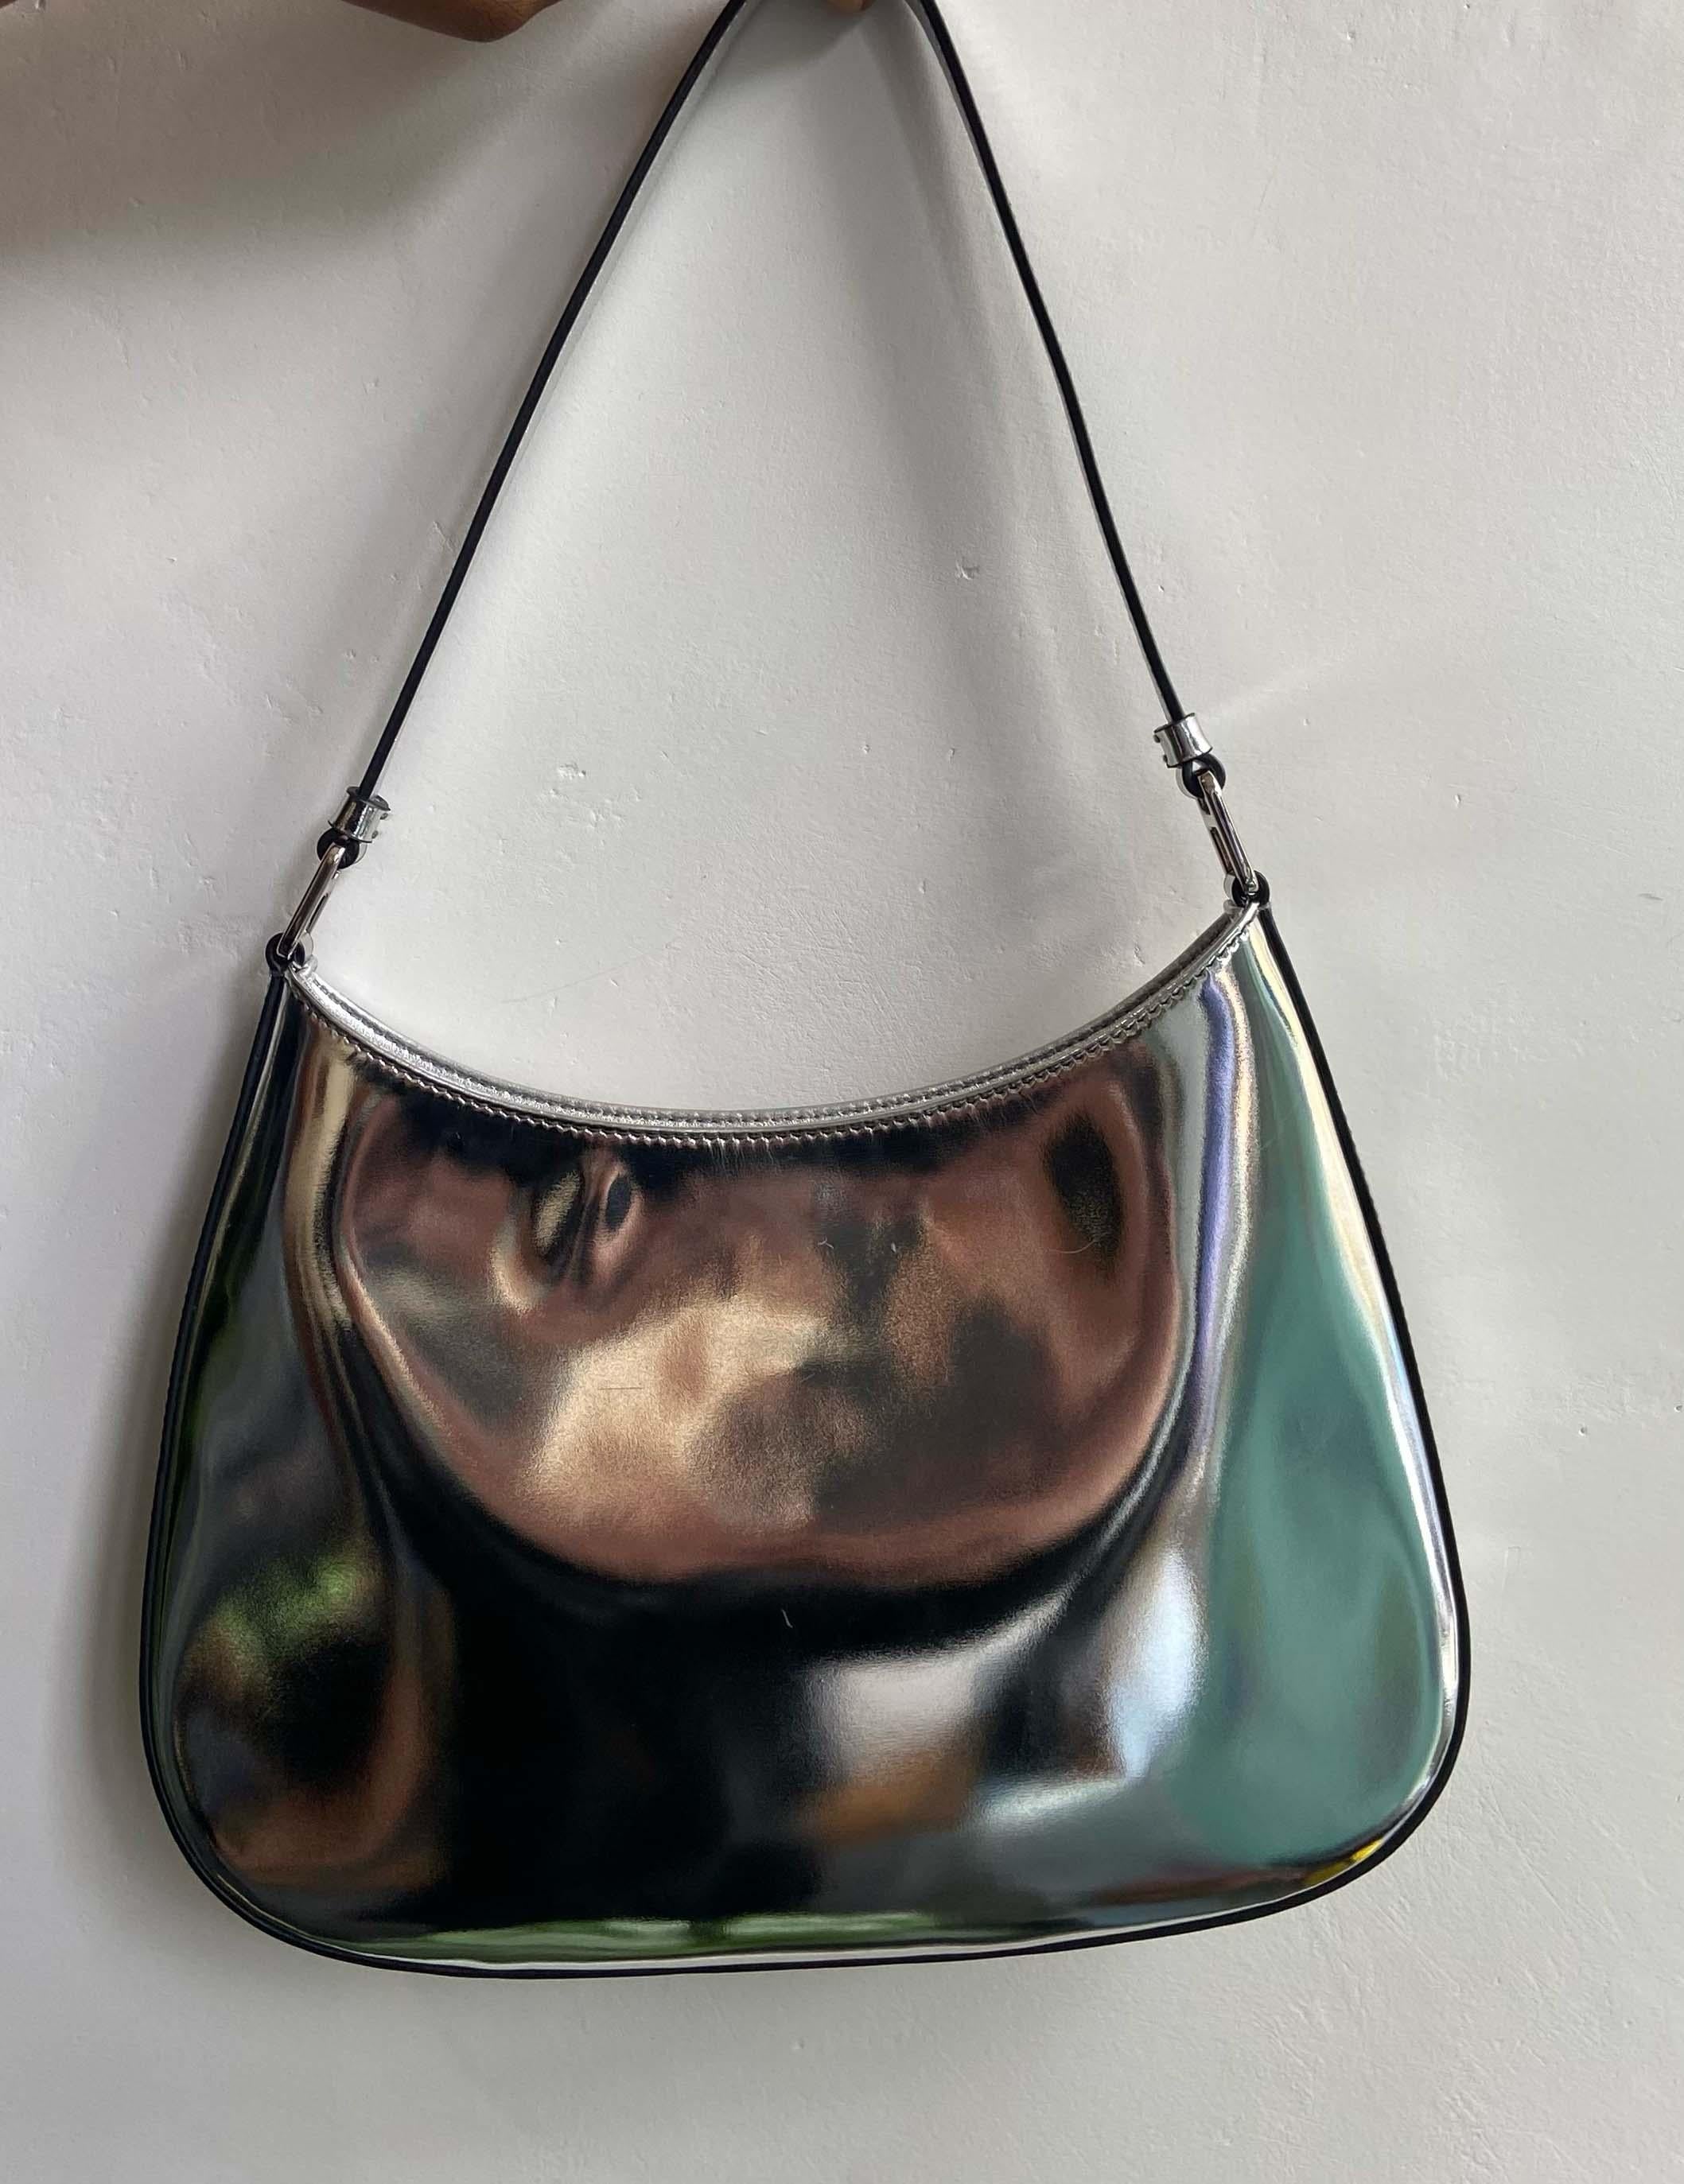 Prada silver Cleo S/S 2023 shoulder bag. metallic silver body, signature triangular enamel logo plaque on front, silver interior with back pocket. This current season's bag is a re-imagination of the iconic 1990's style by Prada. In great to